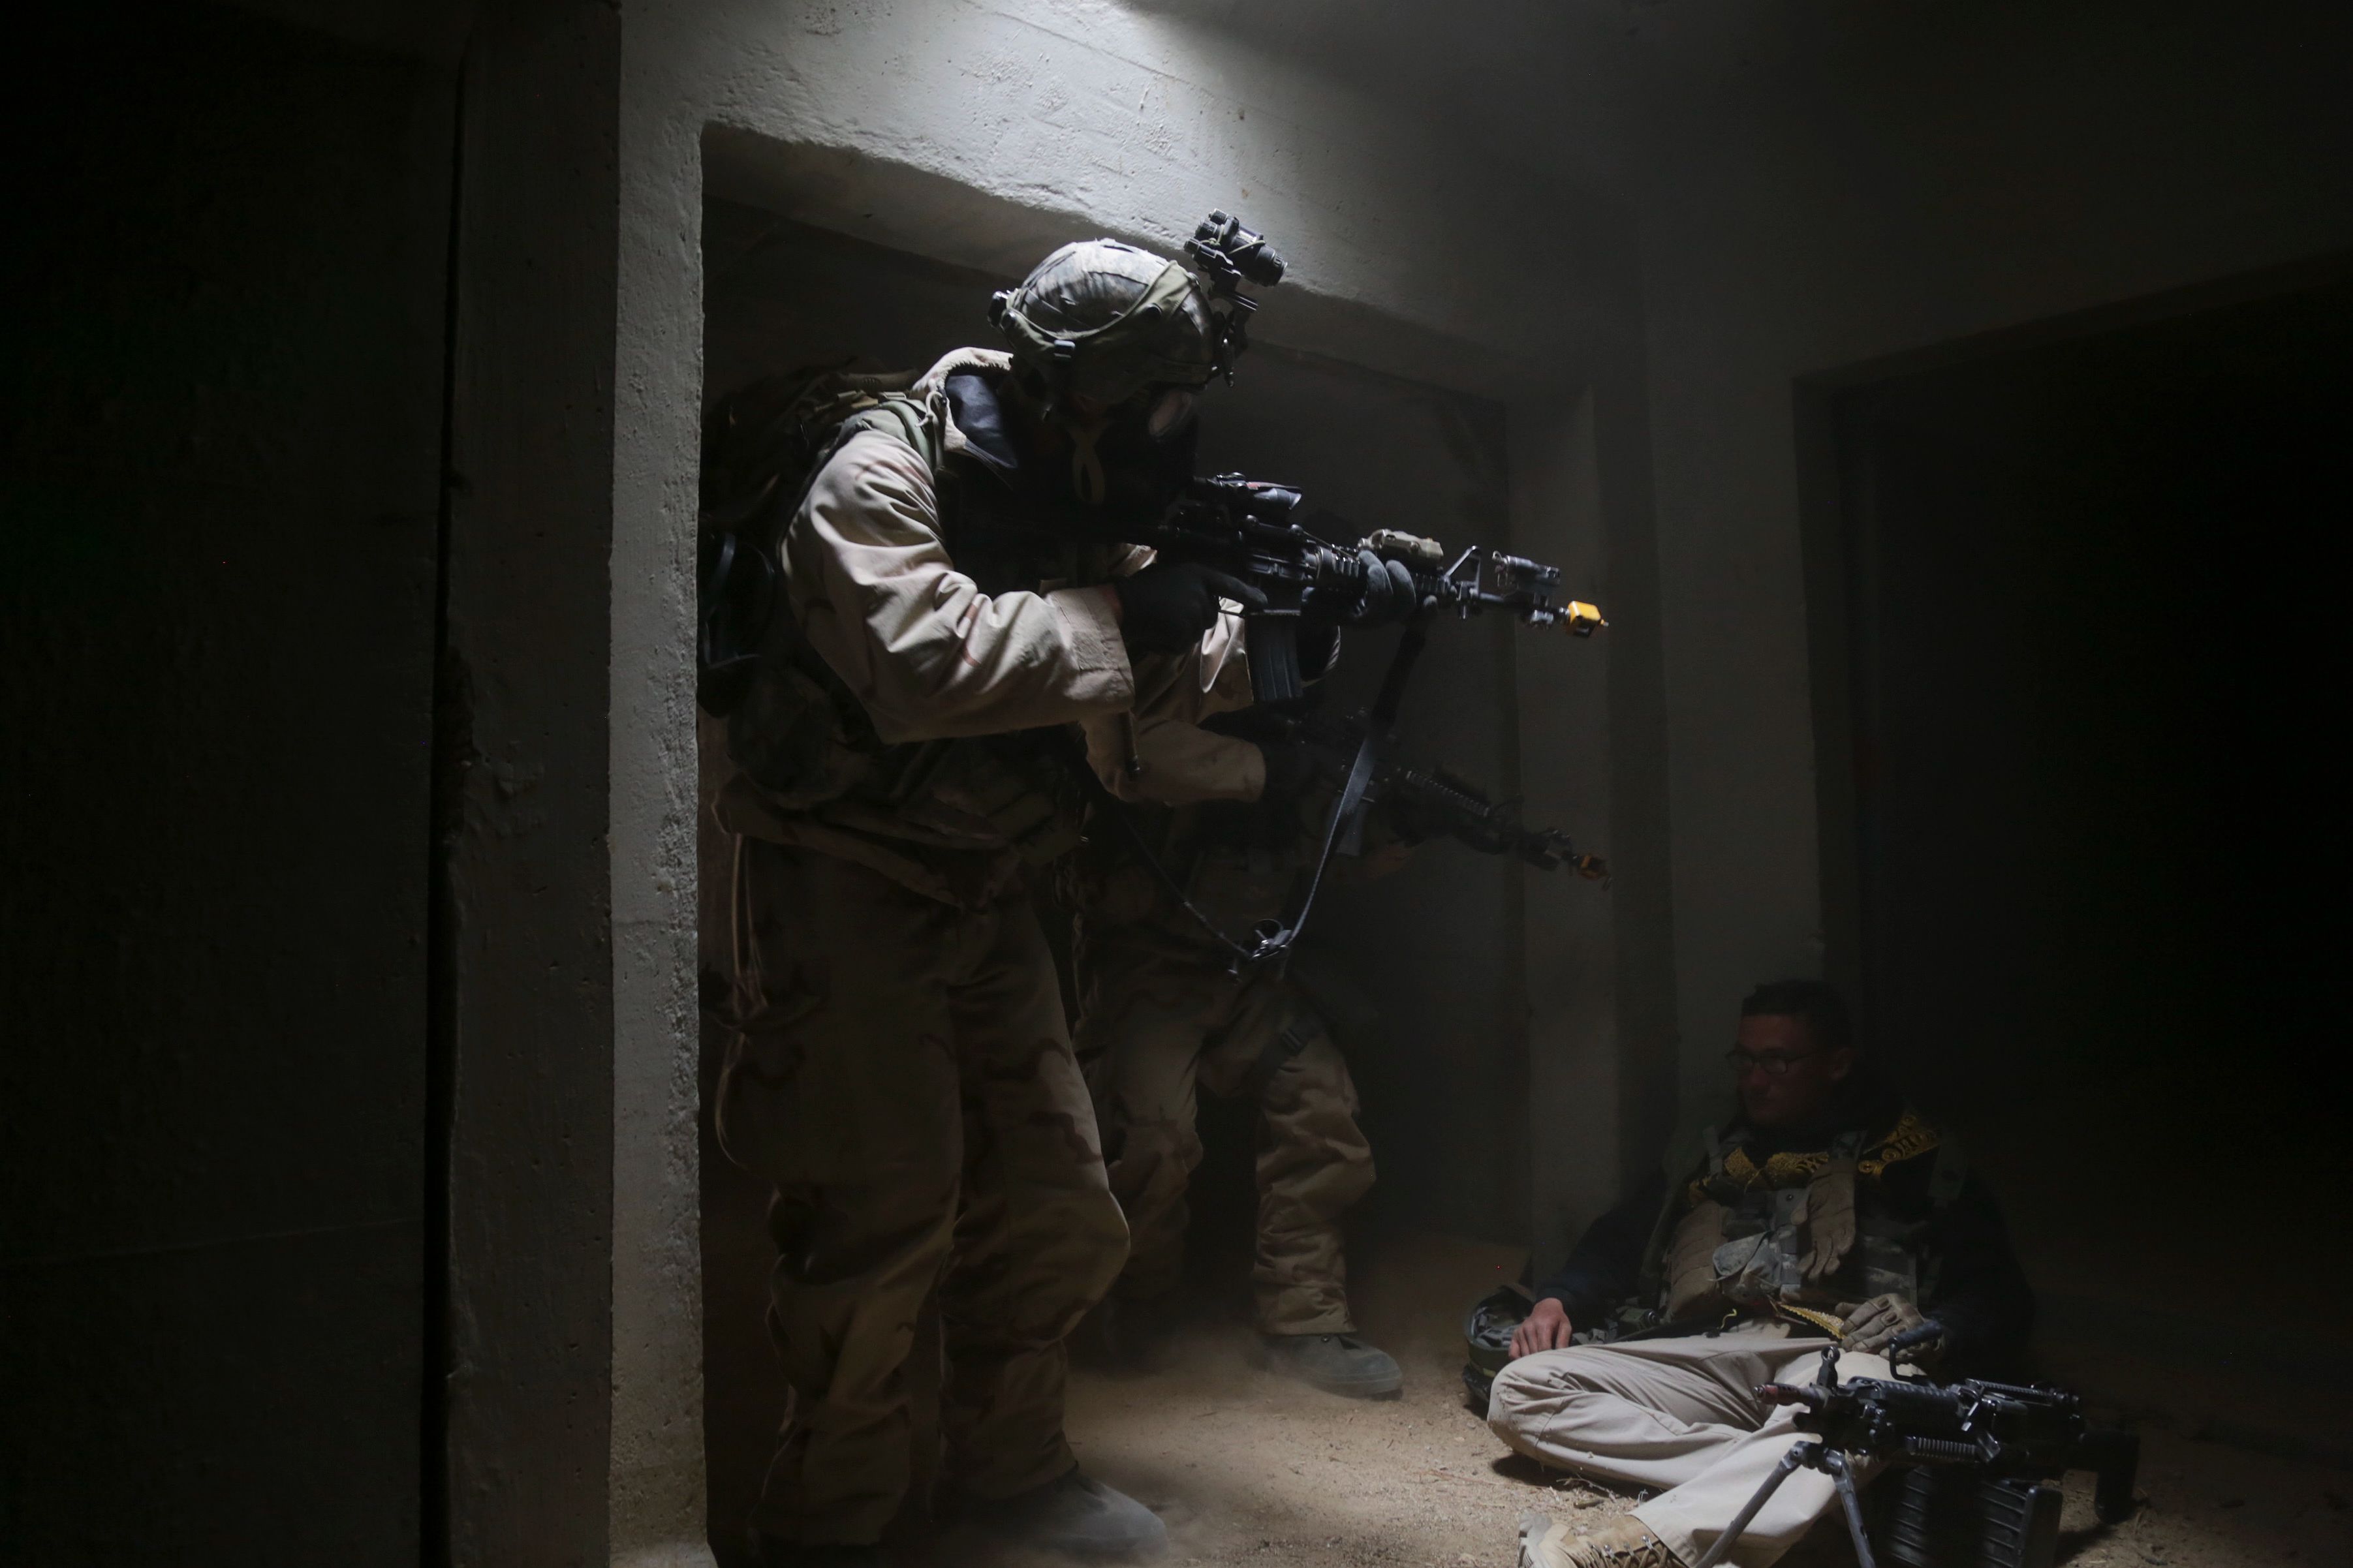 U.S. Army Soldiers assigned to 5th Battalion, 20th Infantry Regiment, 1st Brigade Combat Team, 2nd Infantry Division, clear an enemy tunnel complex during Decisive Action Rotation 18-06 at the National Training Center in Fort Irwin, Calif., April 15, 2018.